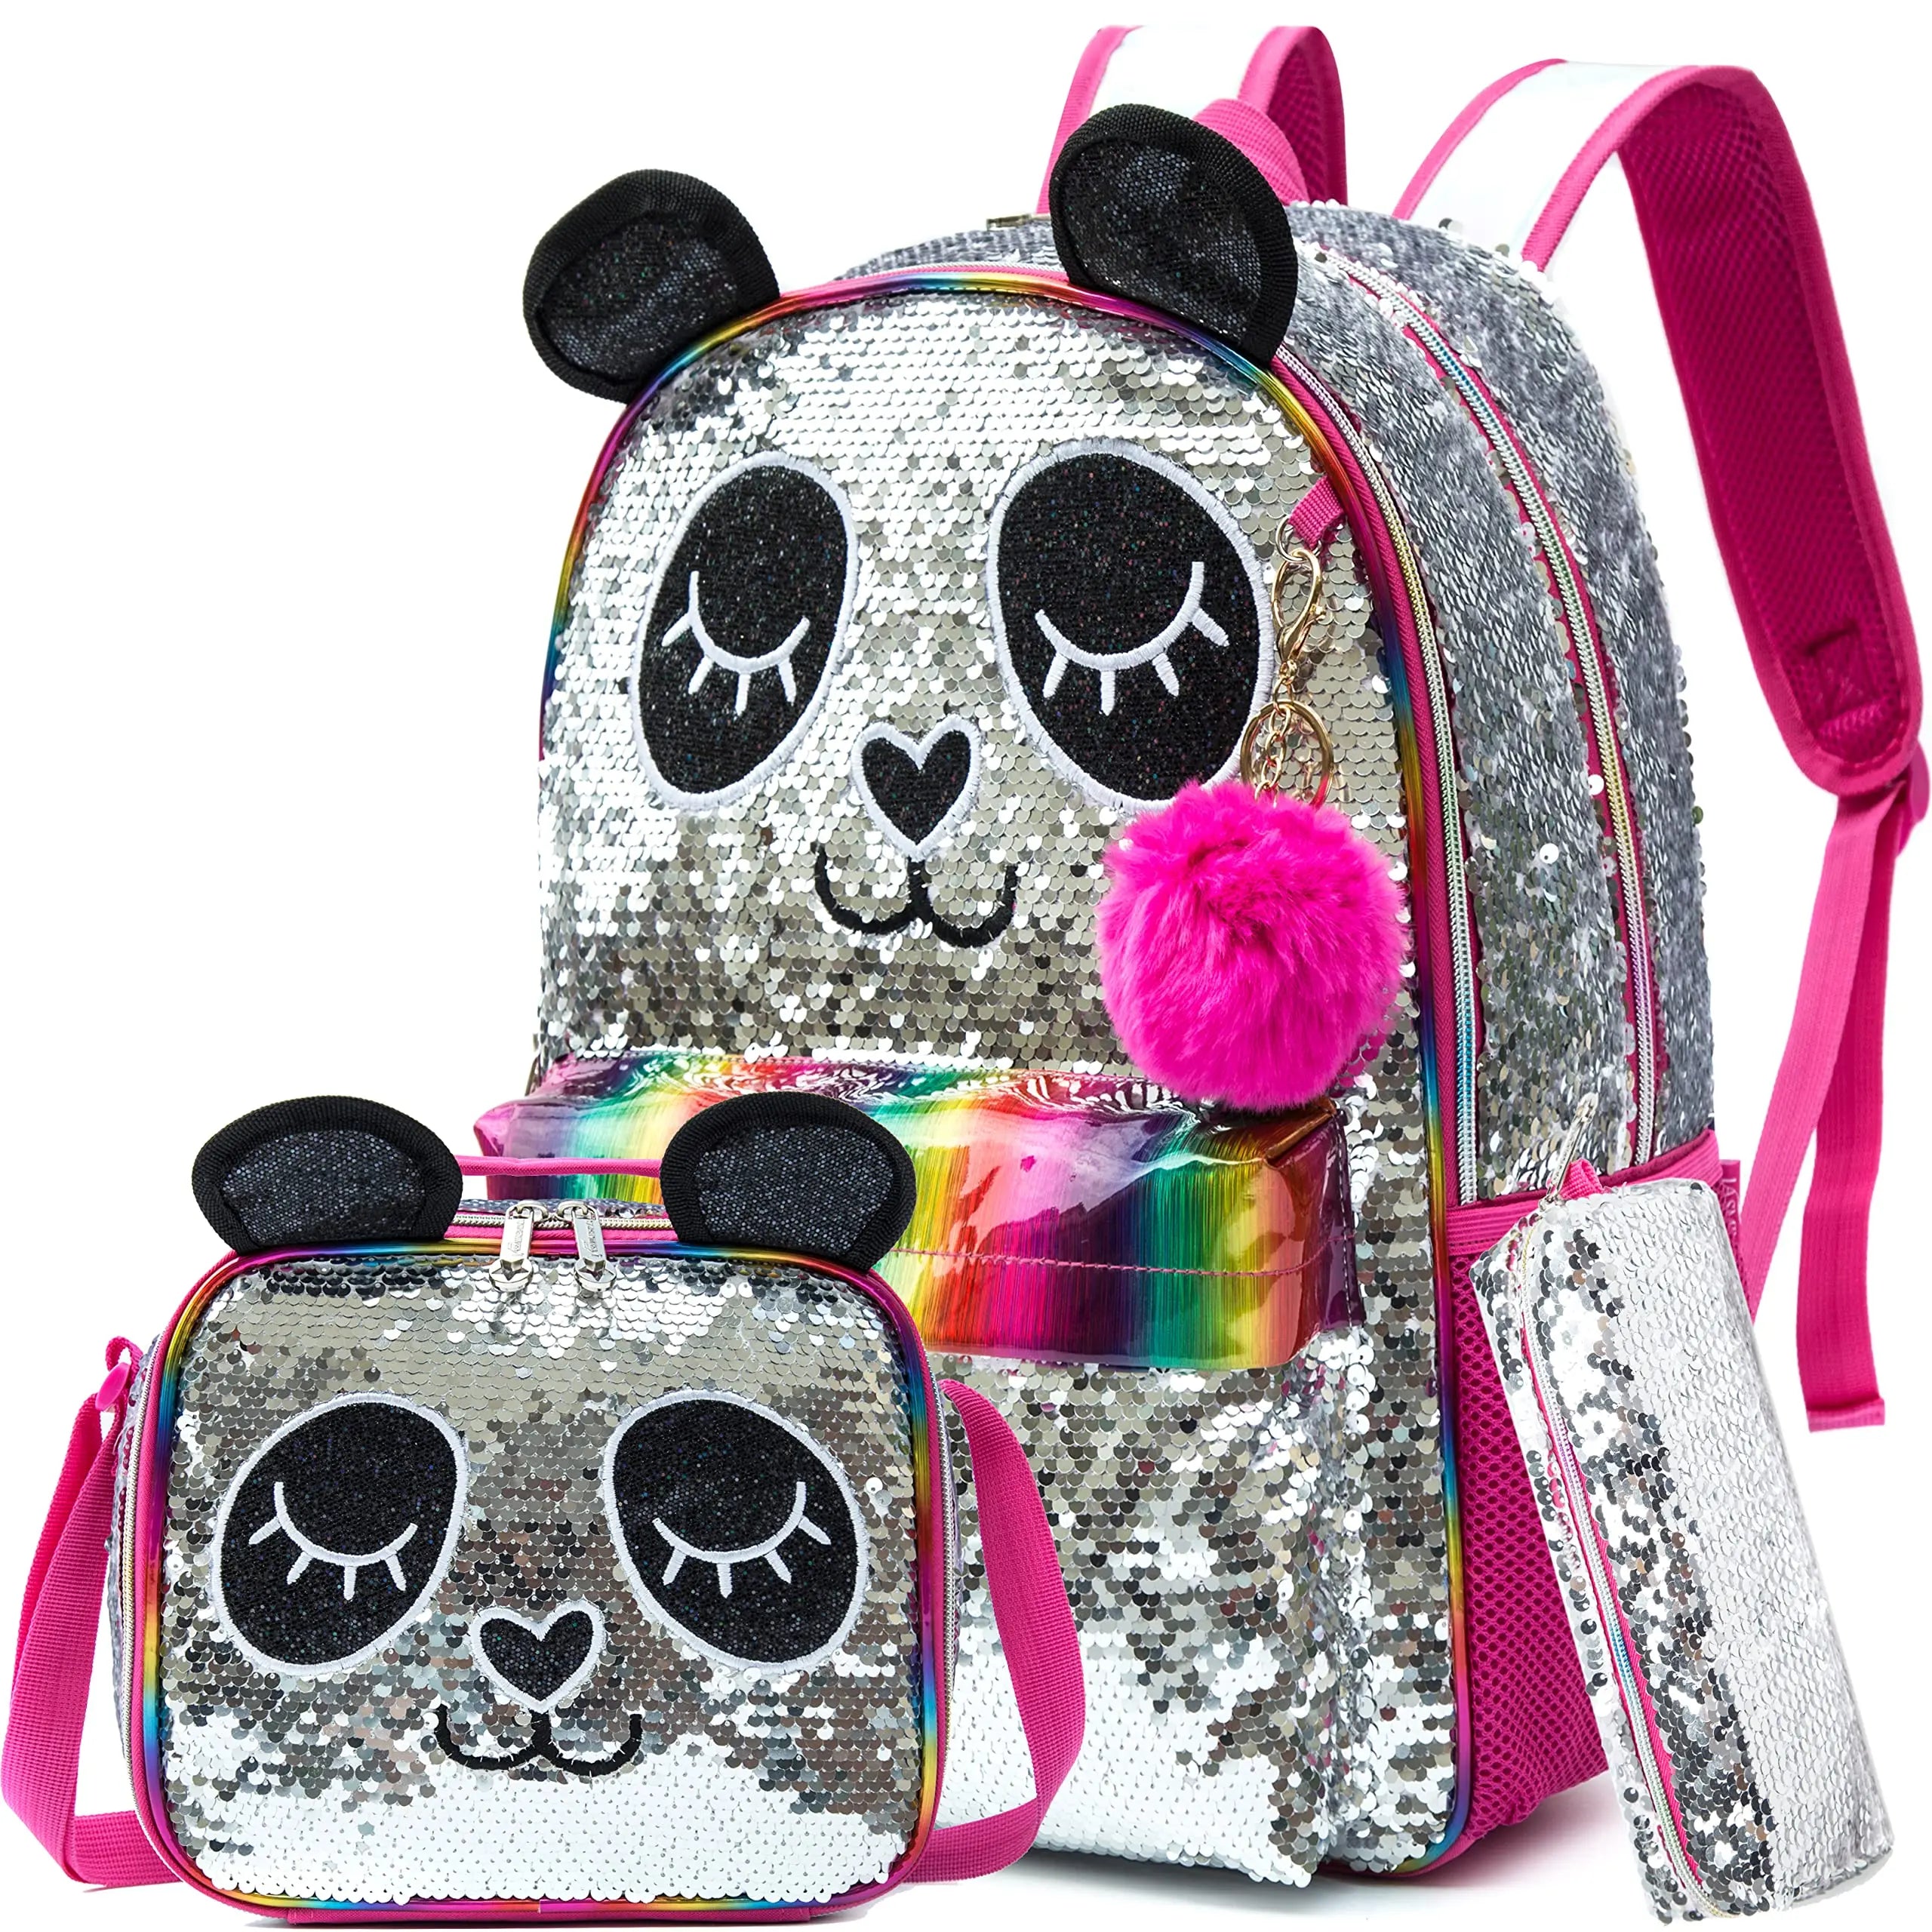 Girls' 16" School Backpack Set - 3pcs with Lunch Box, Ideal for Elementary Students, Travel Sequin Backpack 11902-3caisePanda